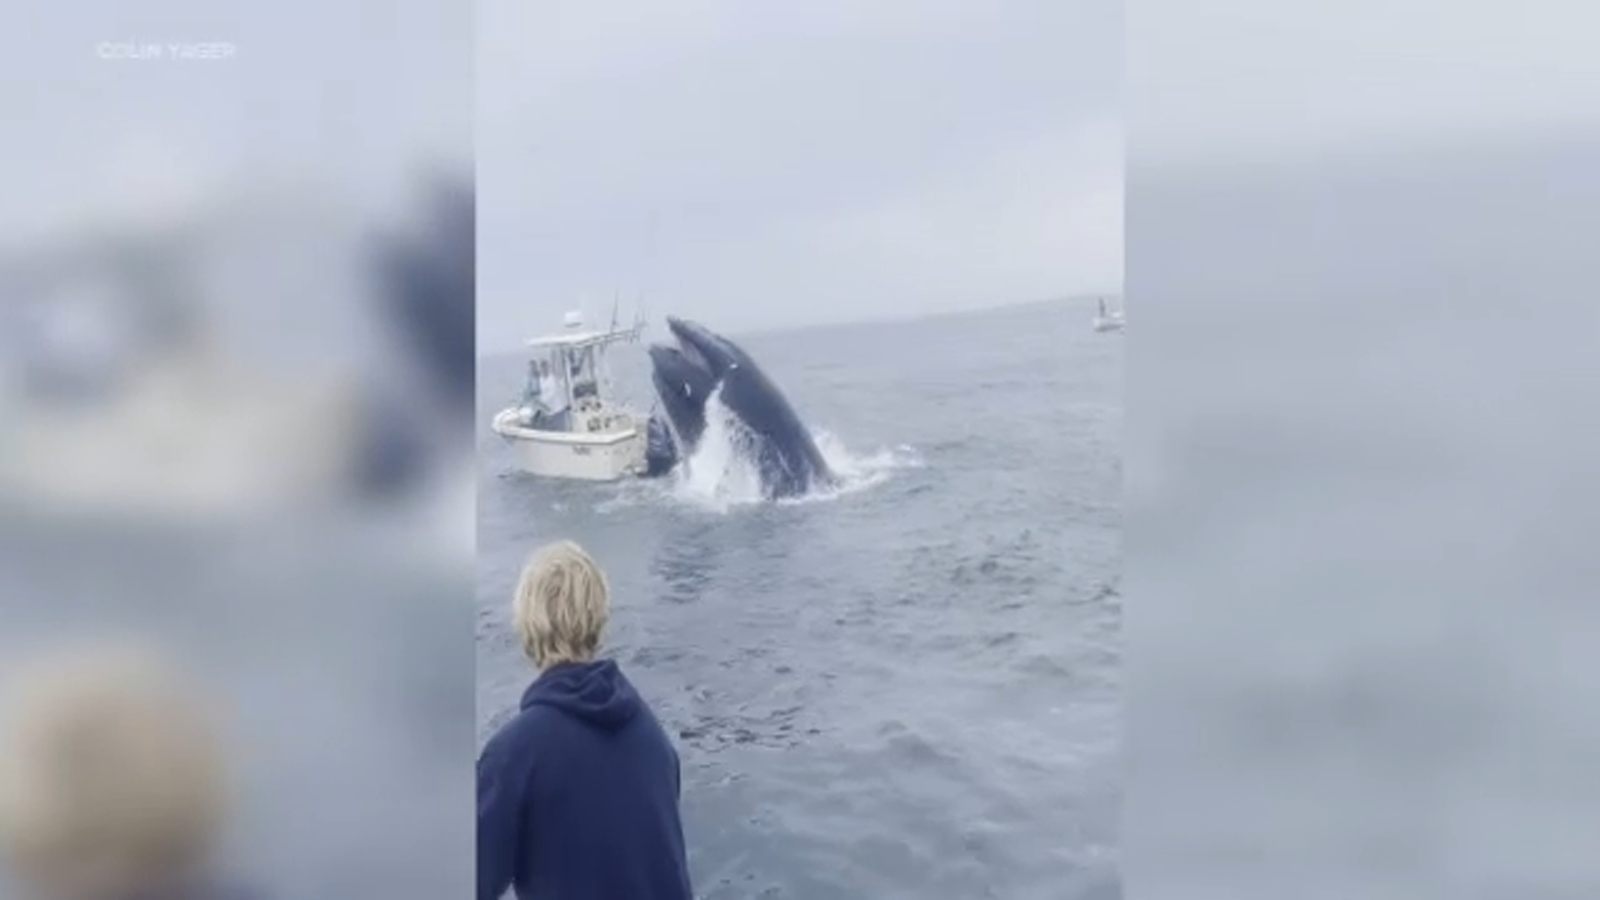 Breached whale capsizes boat on Atlantic Ocean in New Hampshire [Video]